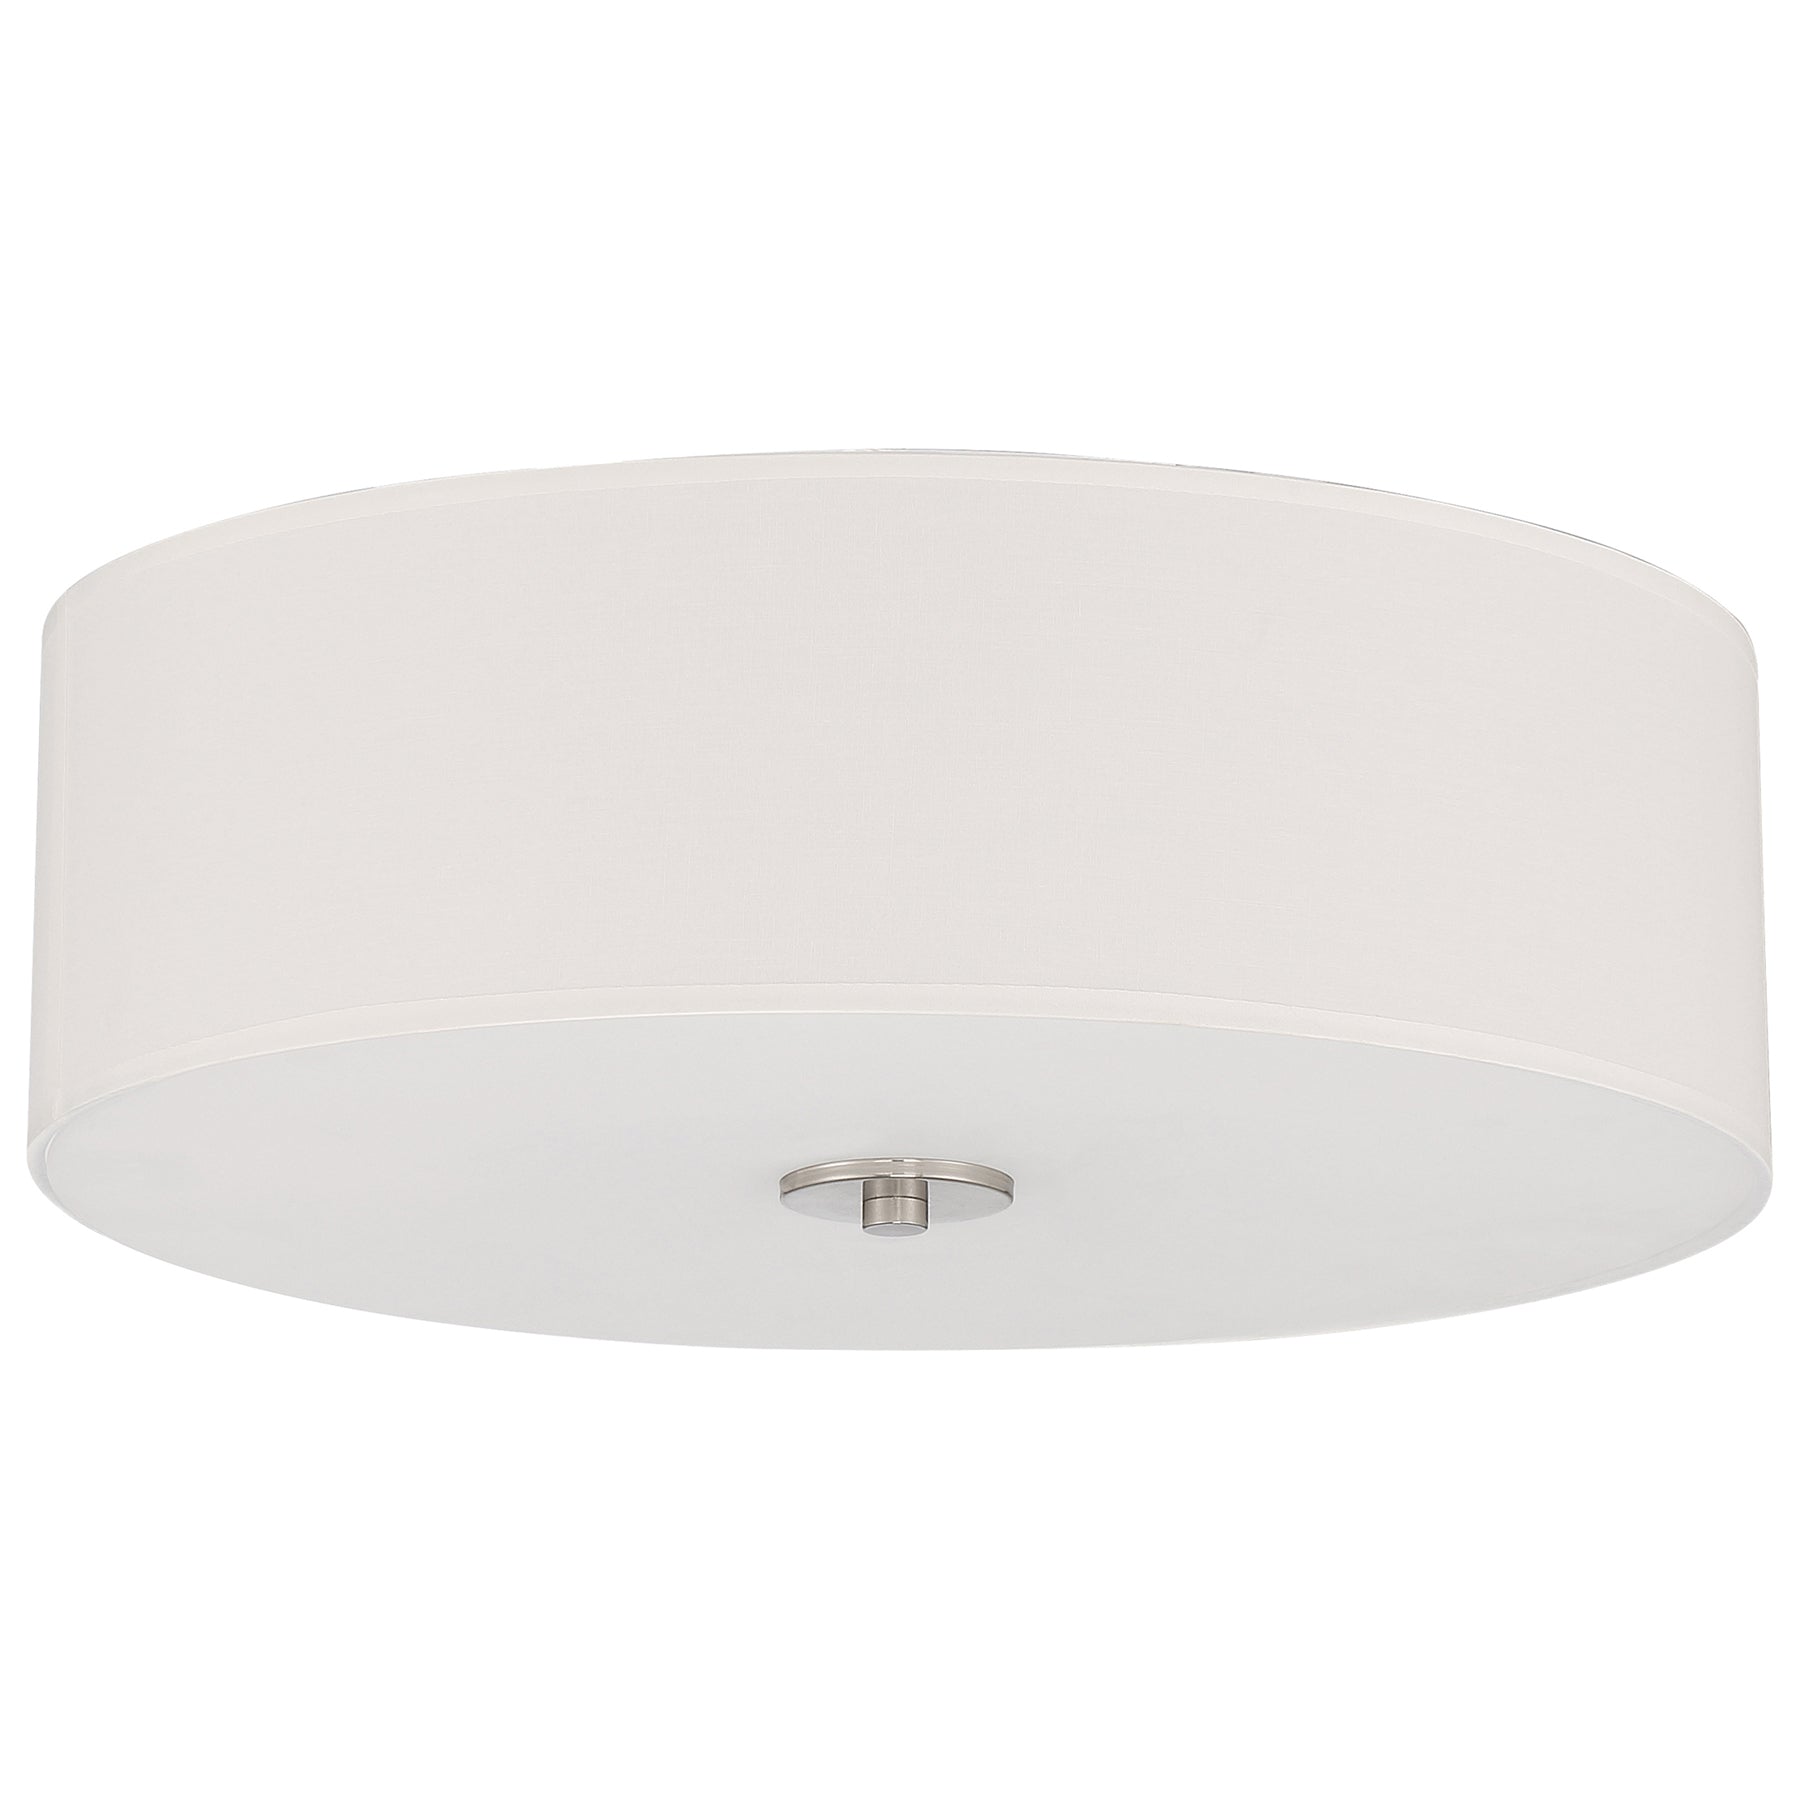 Mid Town 3 Light 18in. Flush Mount - Brushed Steel